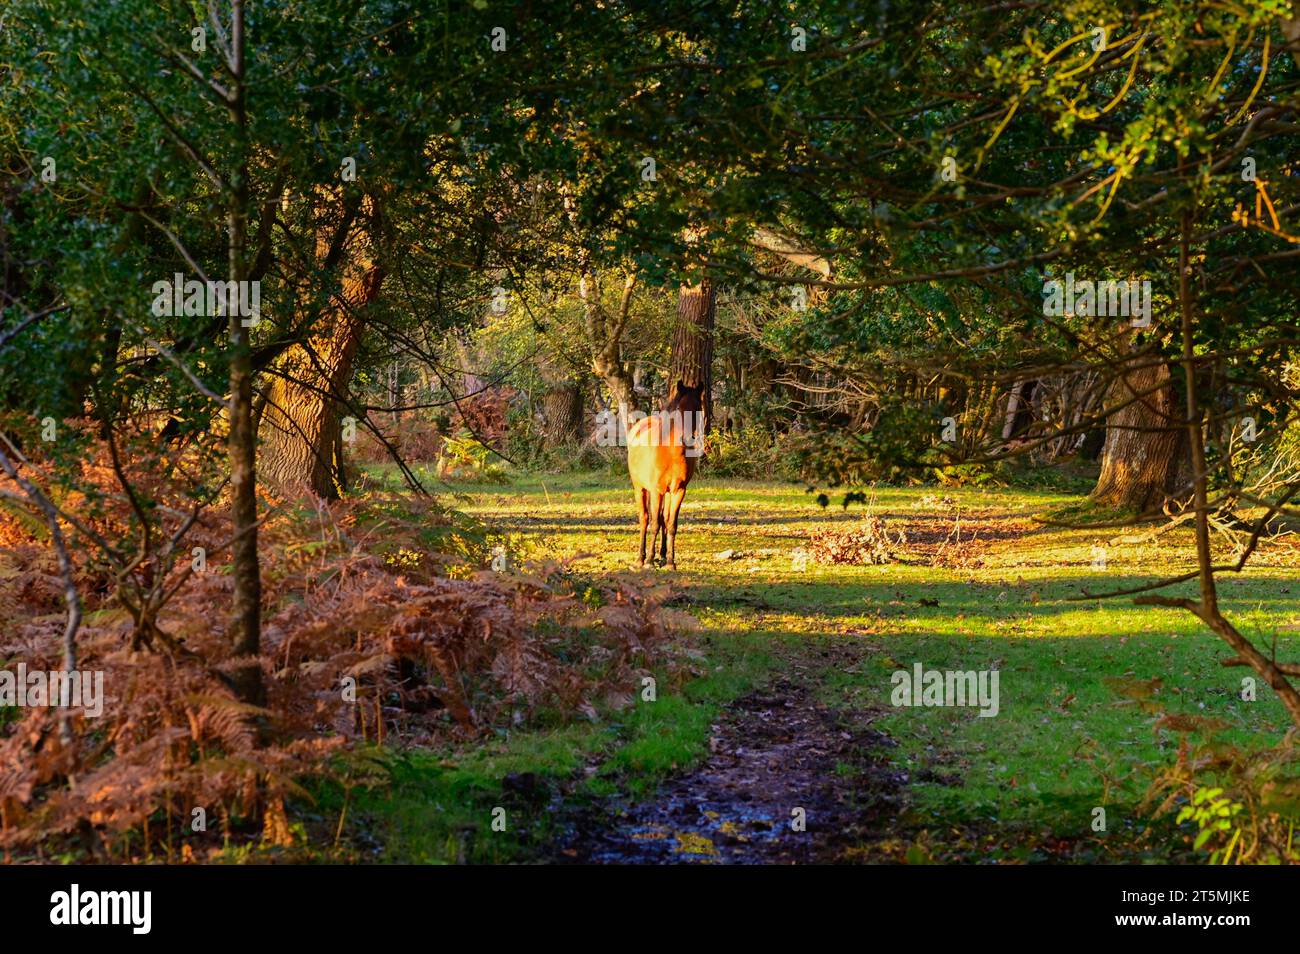 Ponies in the New Forest, England Stock Photo